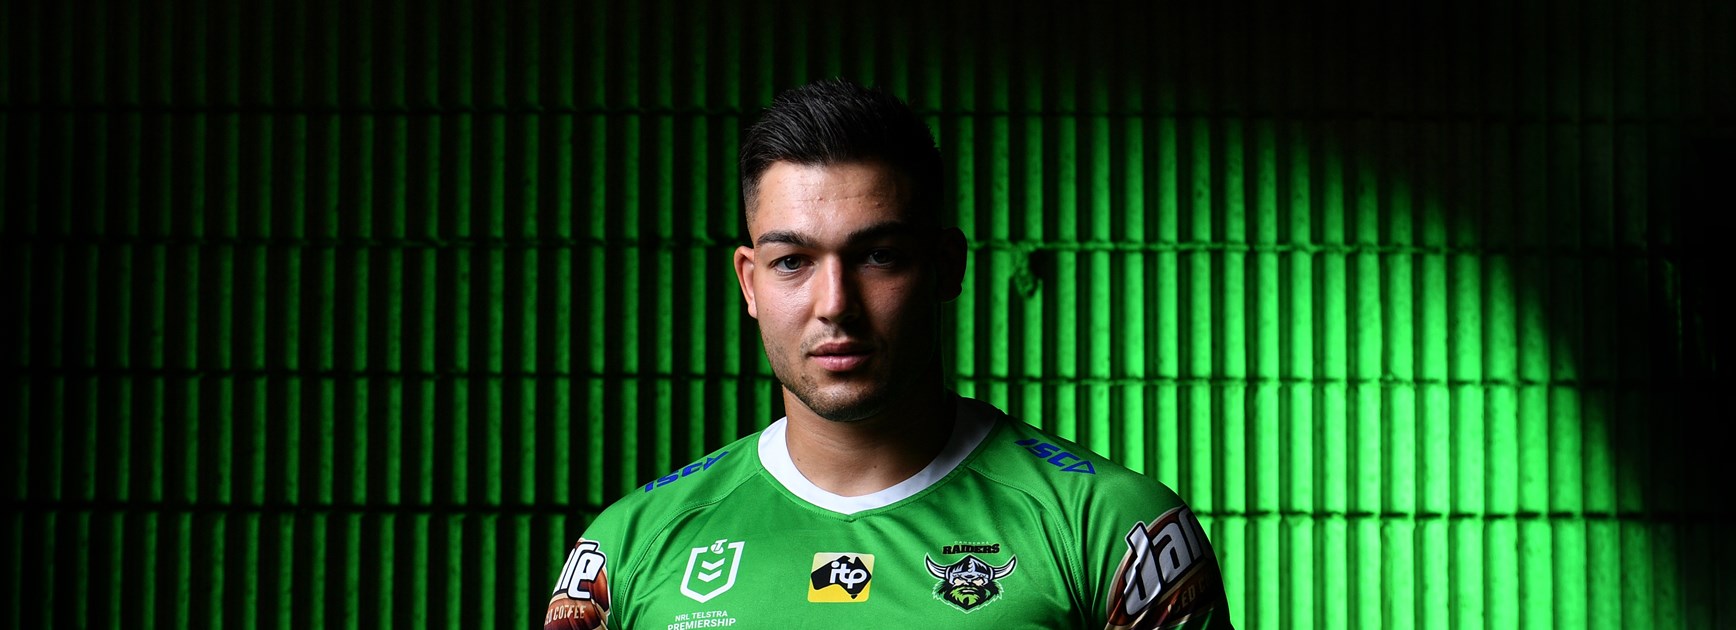 'Raiders royalty' contract offer for Cotric to keep Dogs at bay